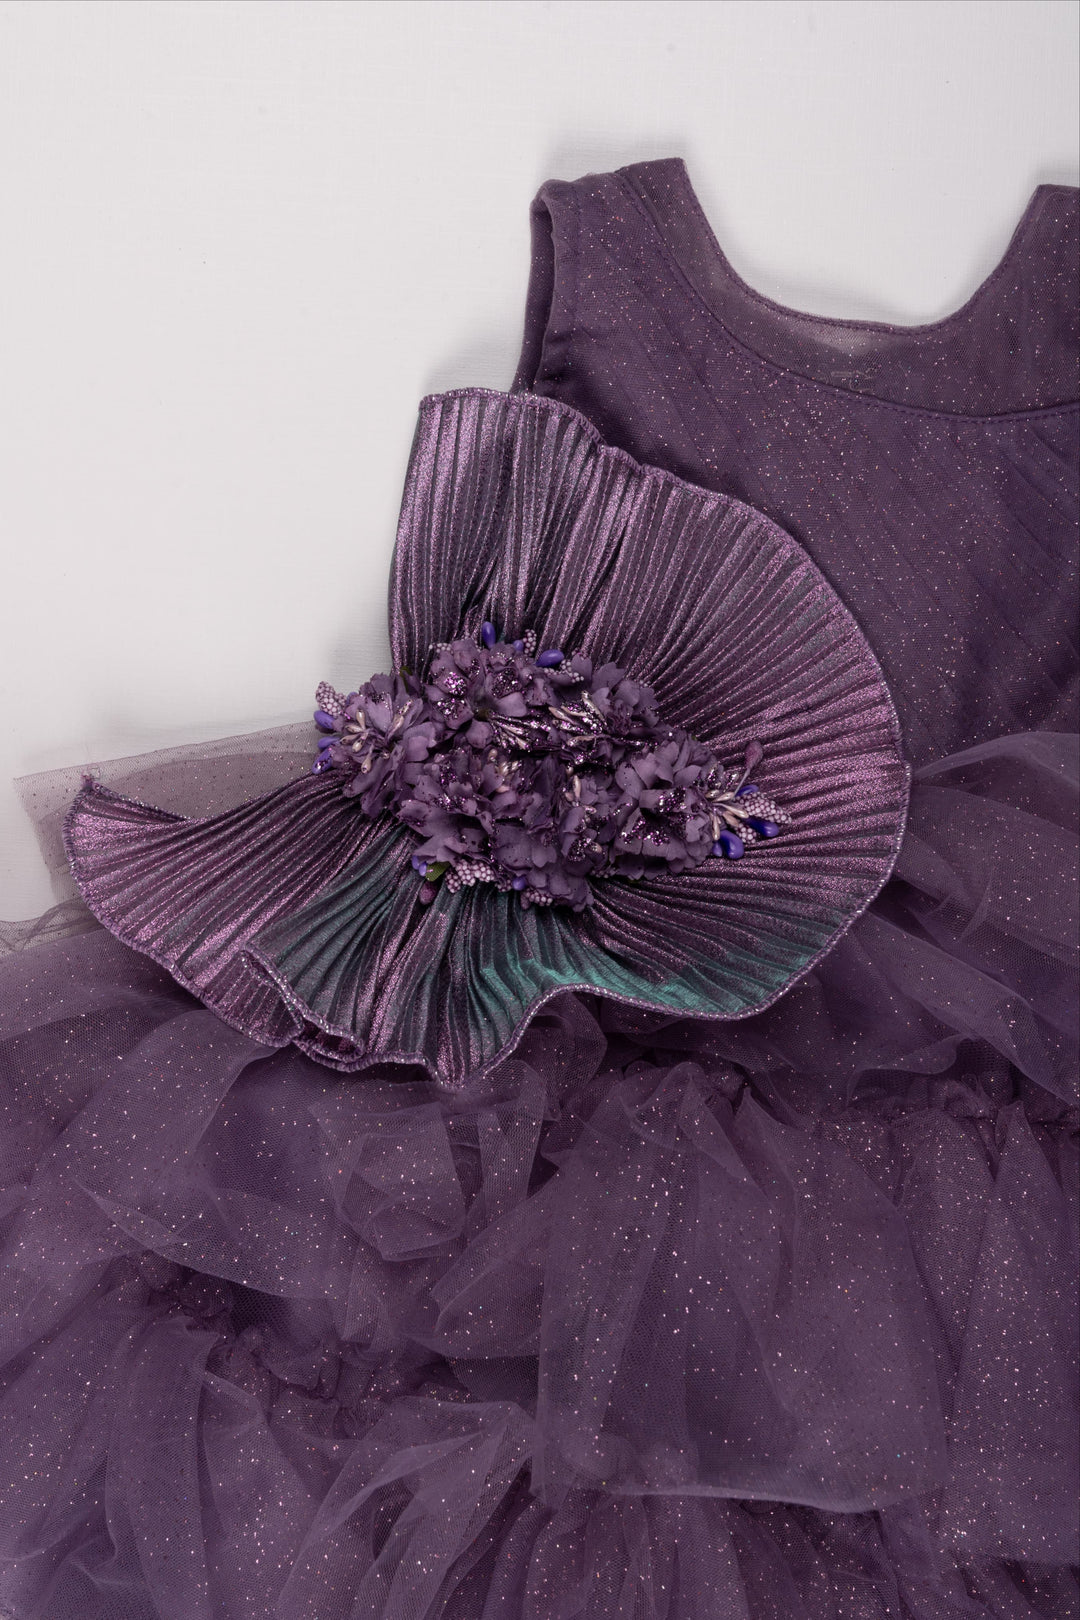 The Nesavu Girls Tutu Frock Purple Panache: Fabulous Floral Embellished Party Frock with Layered Pleats for Trendsetting Girls Nesavu Baby Party Frock Exquisite Designs | Birthday Frock for 2-Year-Old Girl | The Nesavu